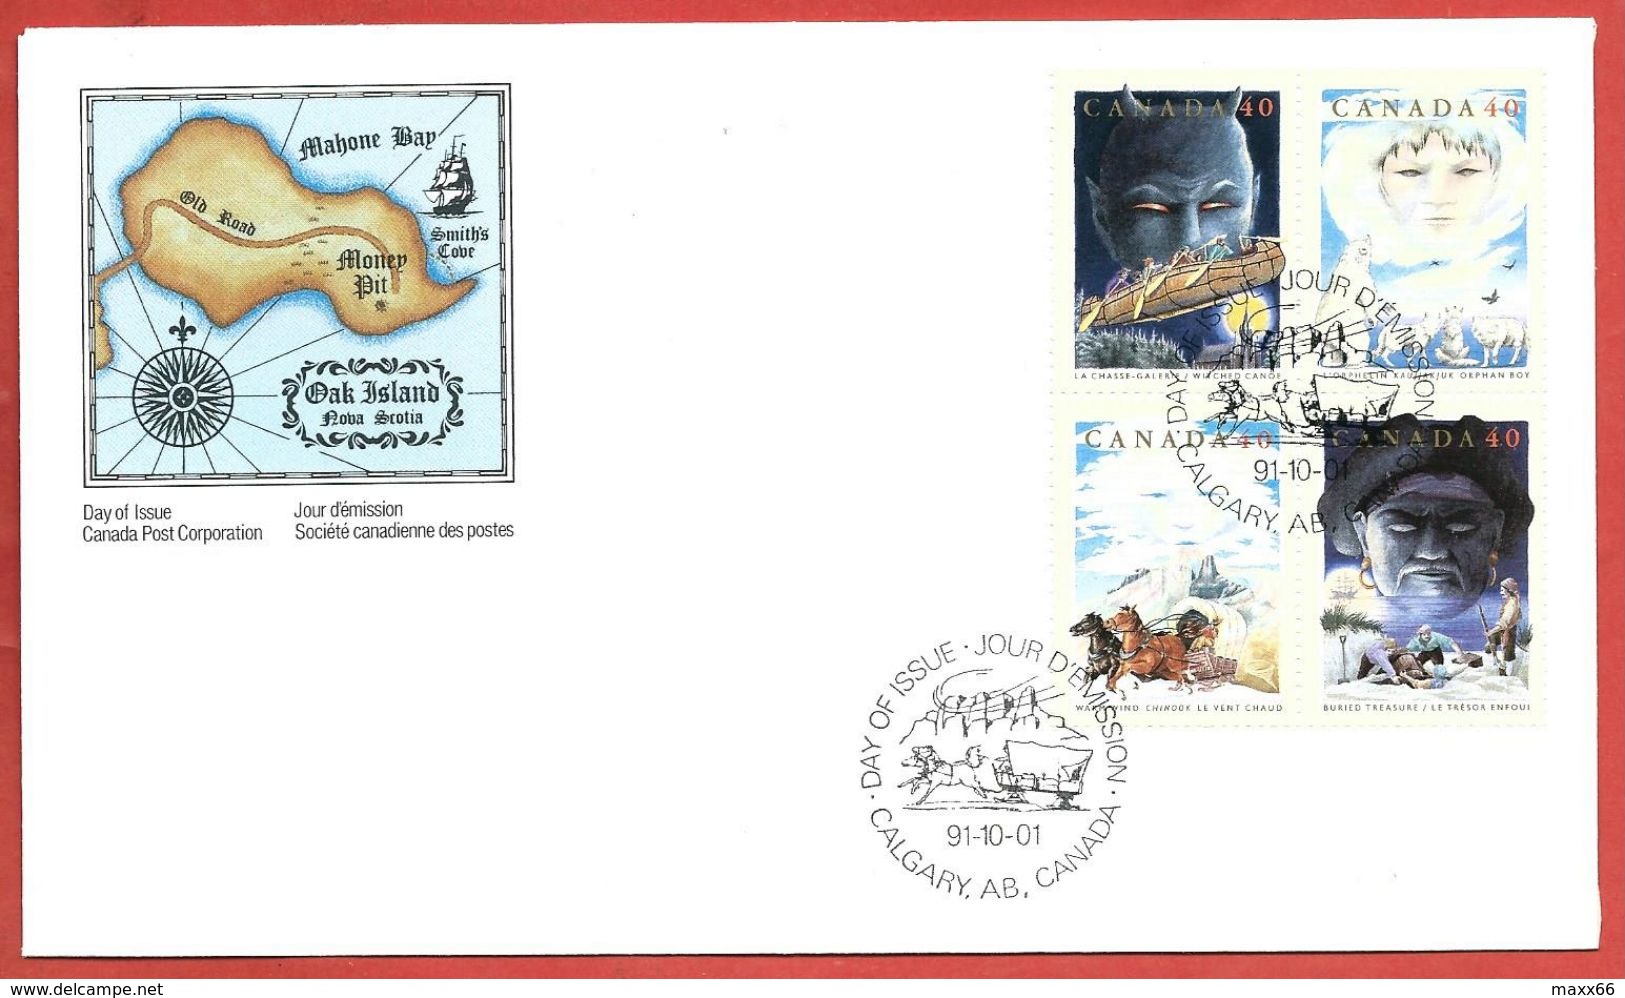 CANADA PRESENTATION PACK FDC - 1991 FOLKTALES - Contes Populaires - With FDC - FOLDER - Commemorative Covers